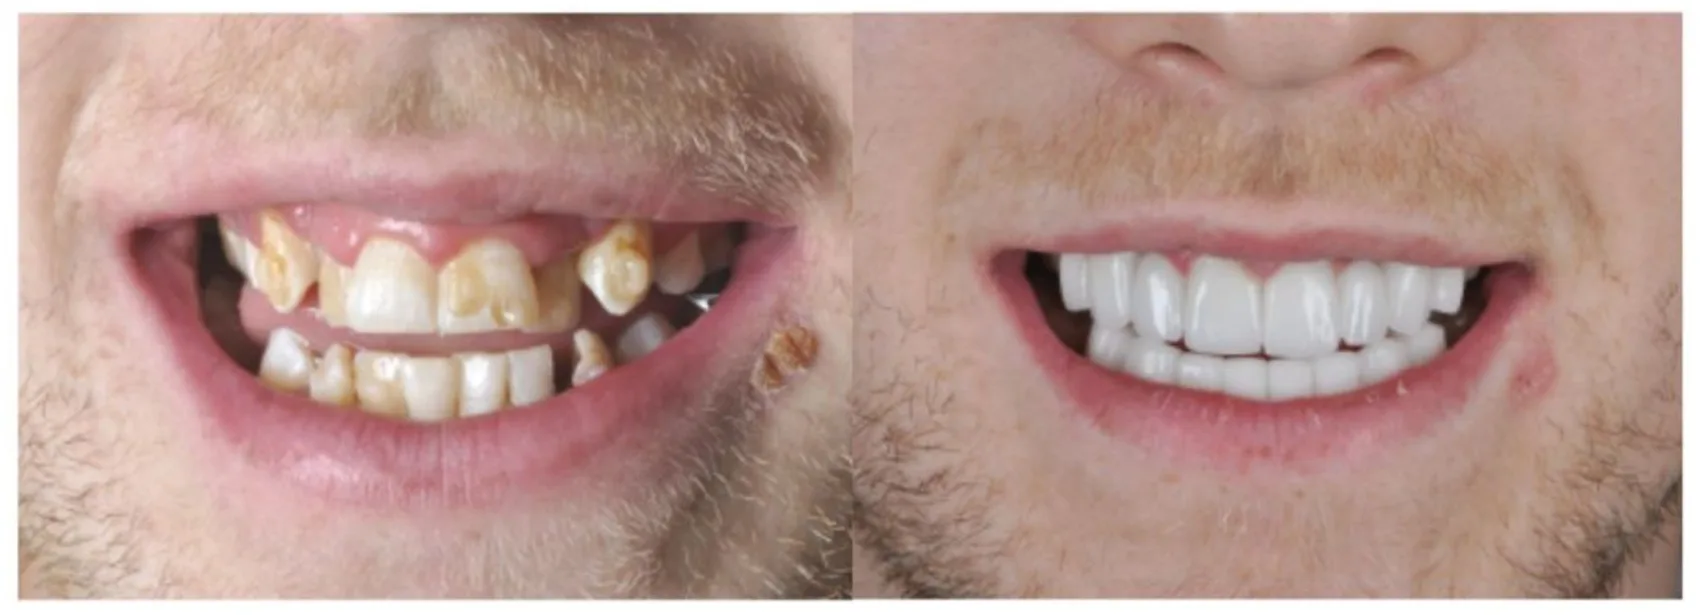 Patient showing teeth before and after having dental veneers fitted.